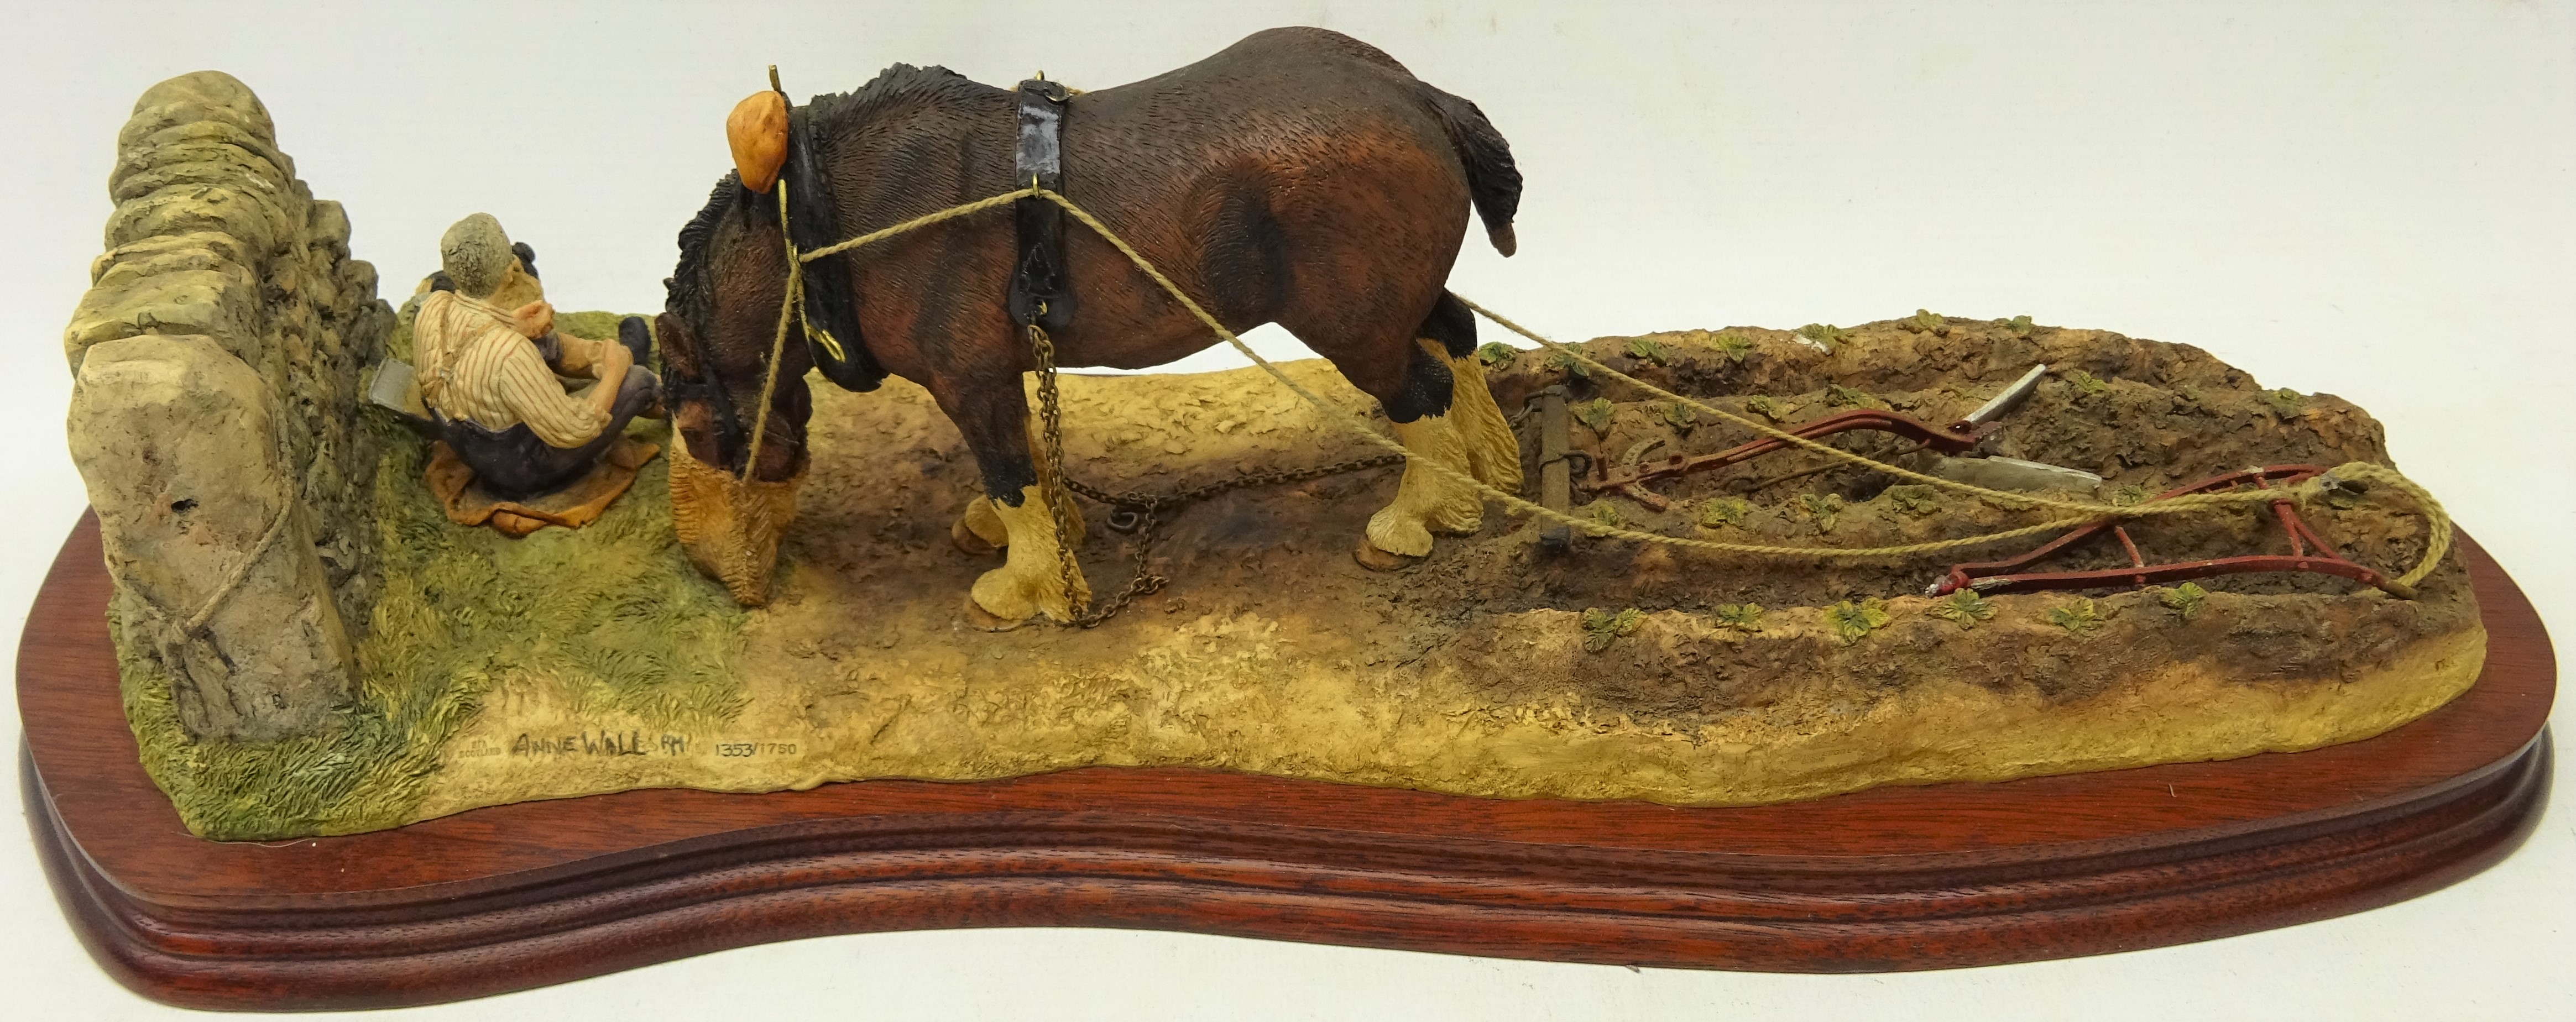 Border Fine Arts large limited edition group of a shire horse ploughing 'Ploughman's Lunch', No. - Image 2 of 3